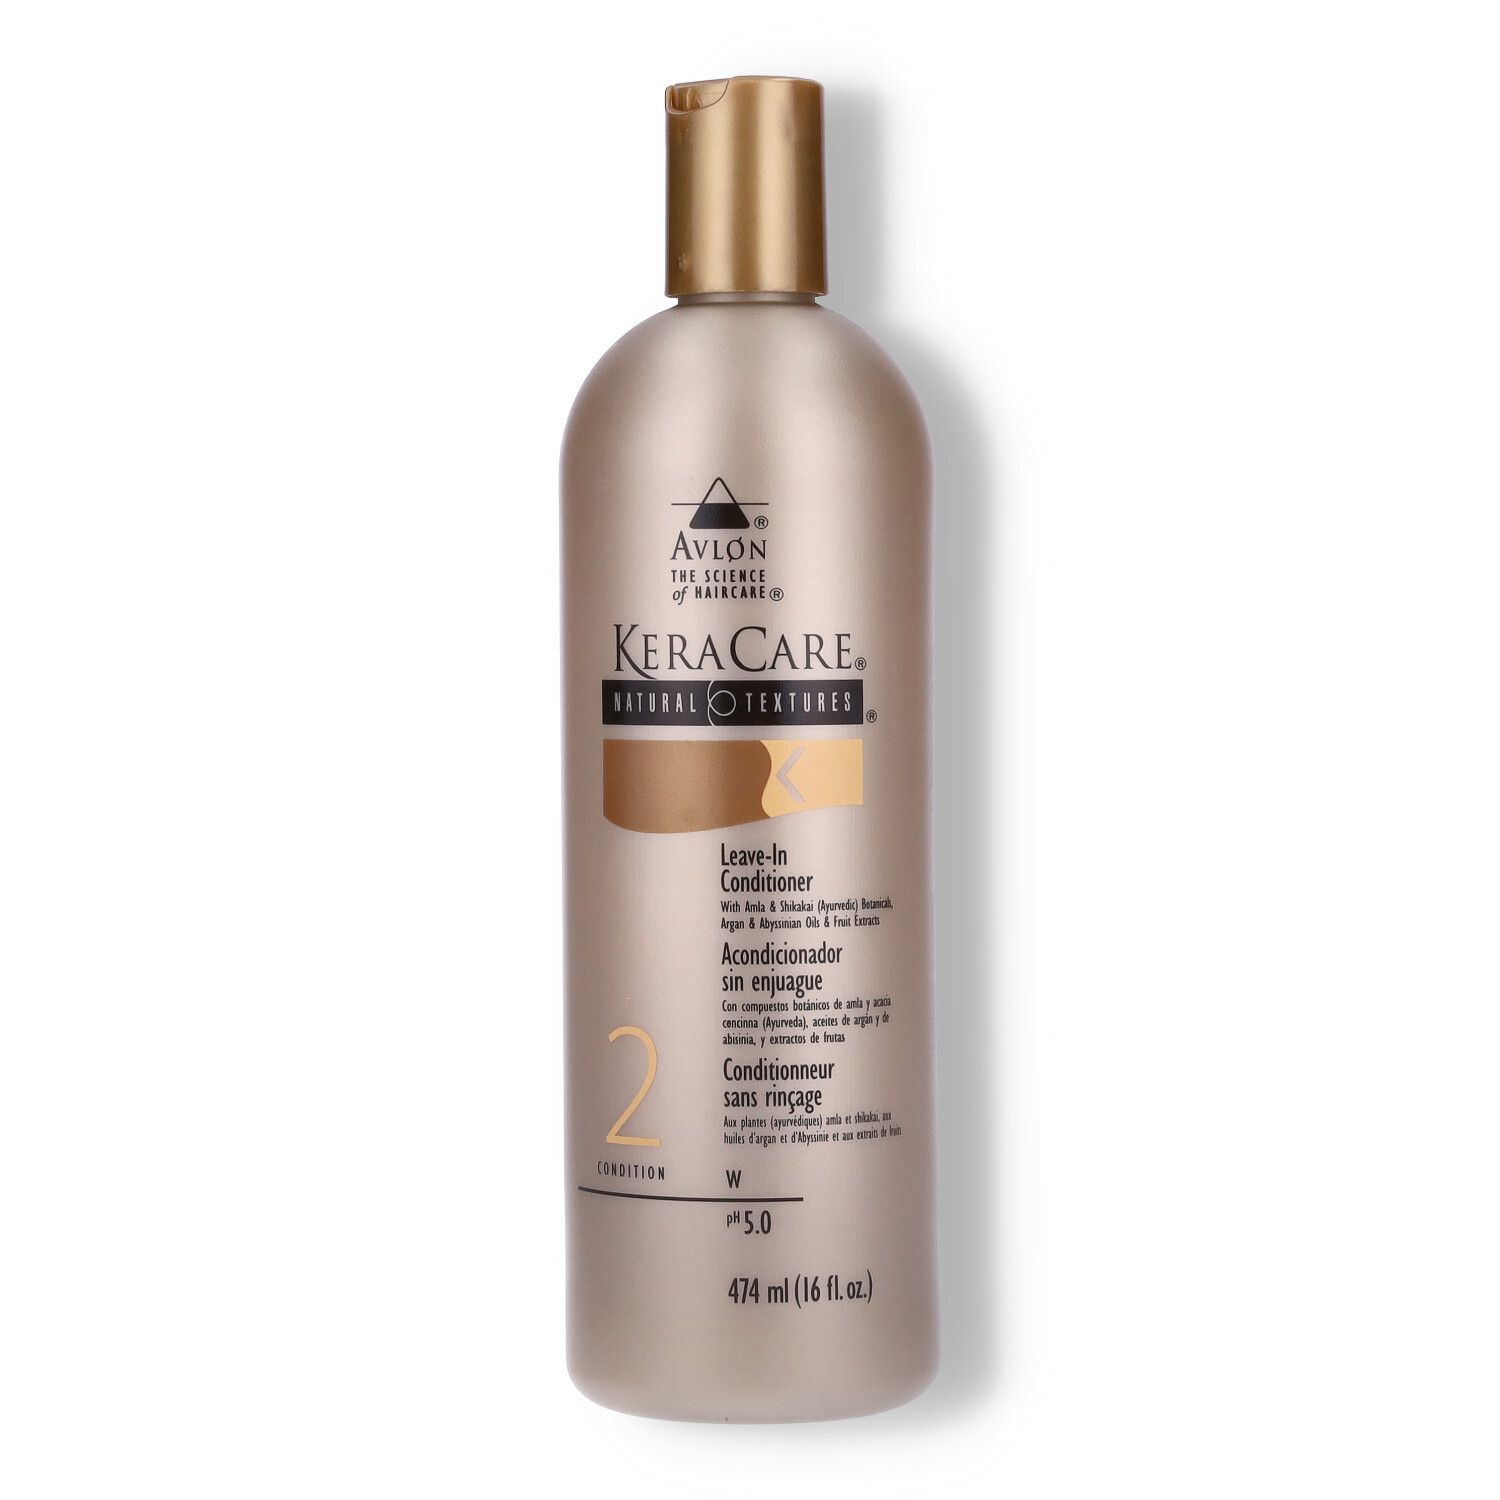 KeraCare Natural Textures Leave-In Conditioner - 16oz